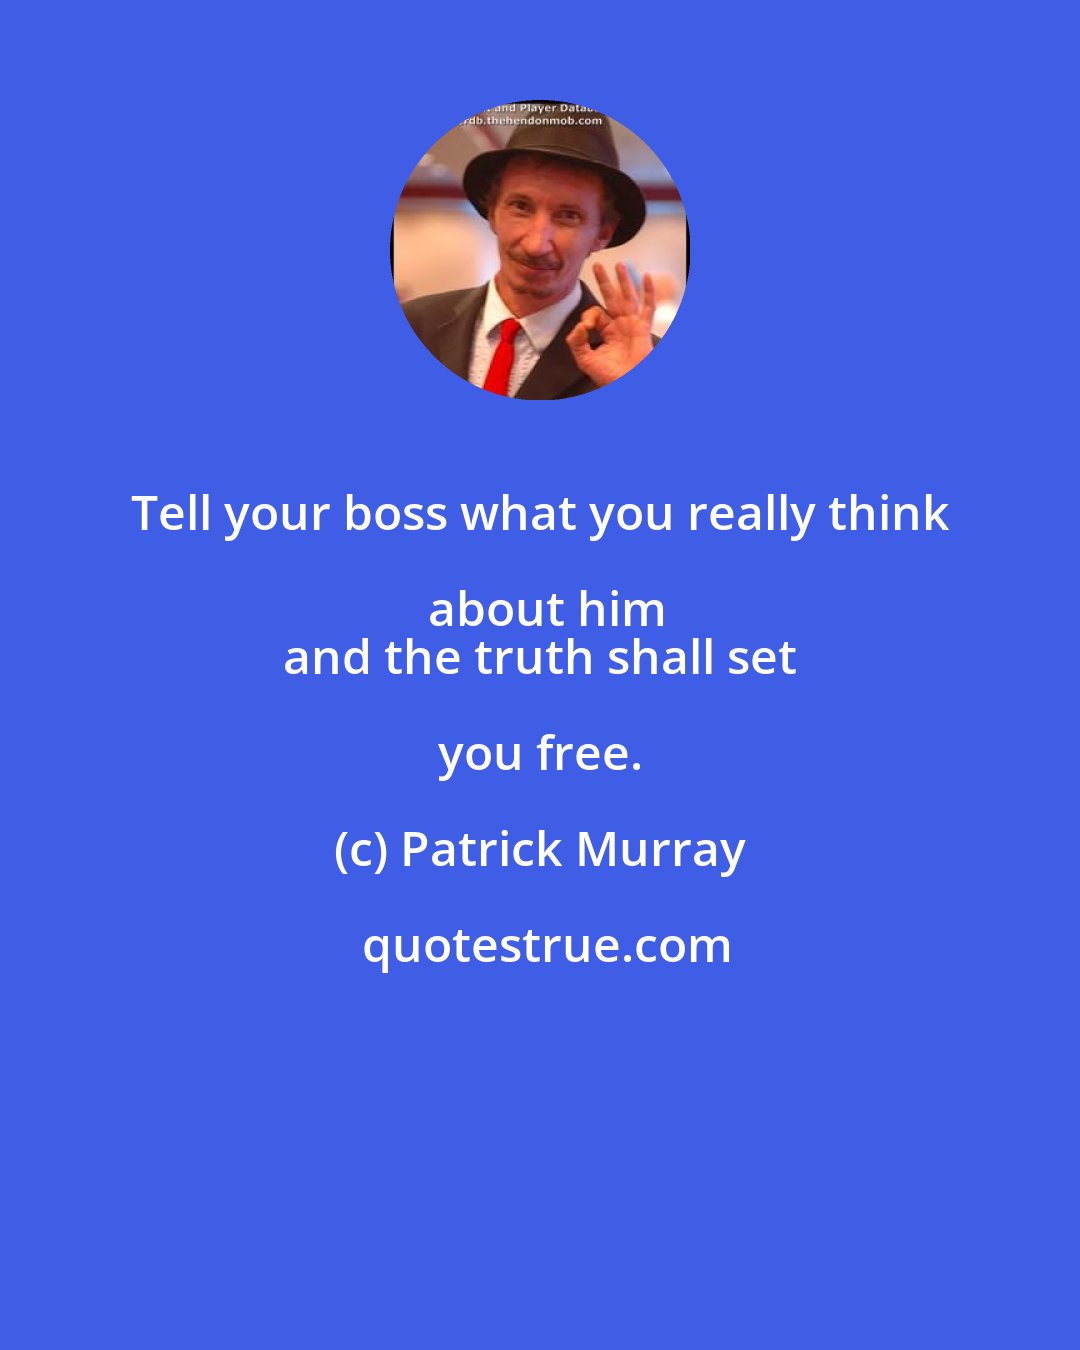 Patrick Murray: Tell your boss what you really think about him
 and the truth shall set you free.